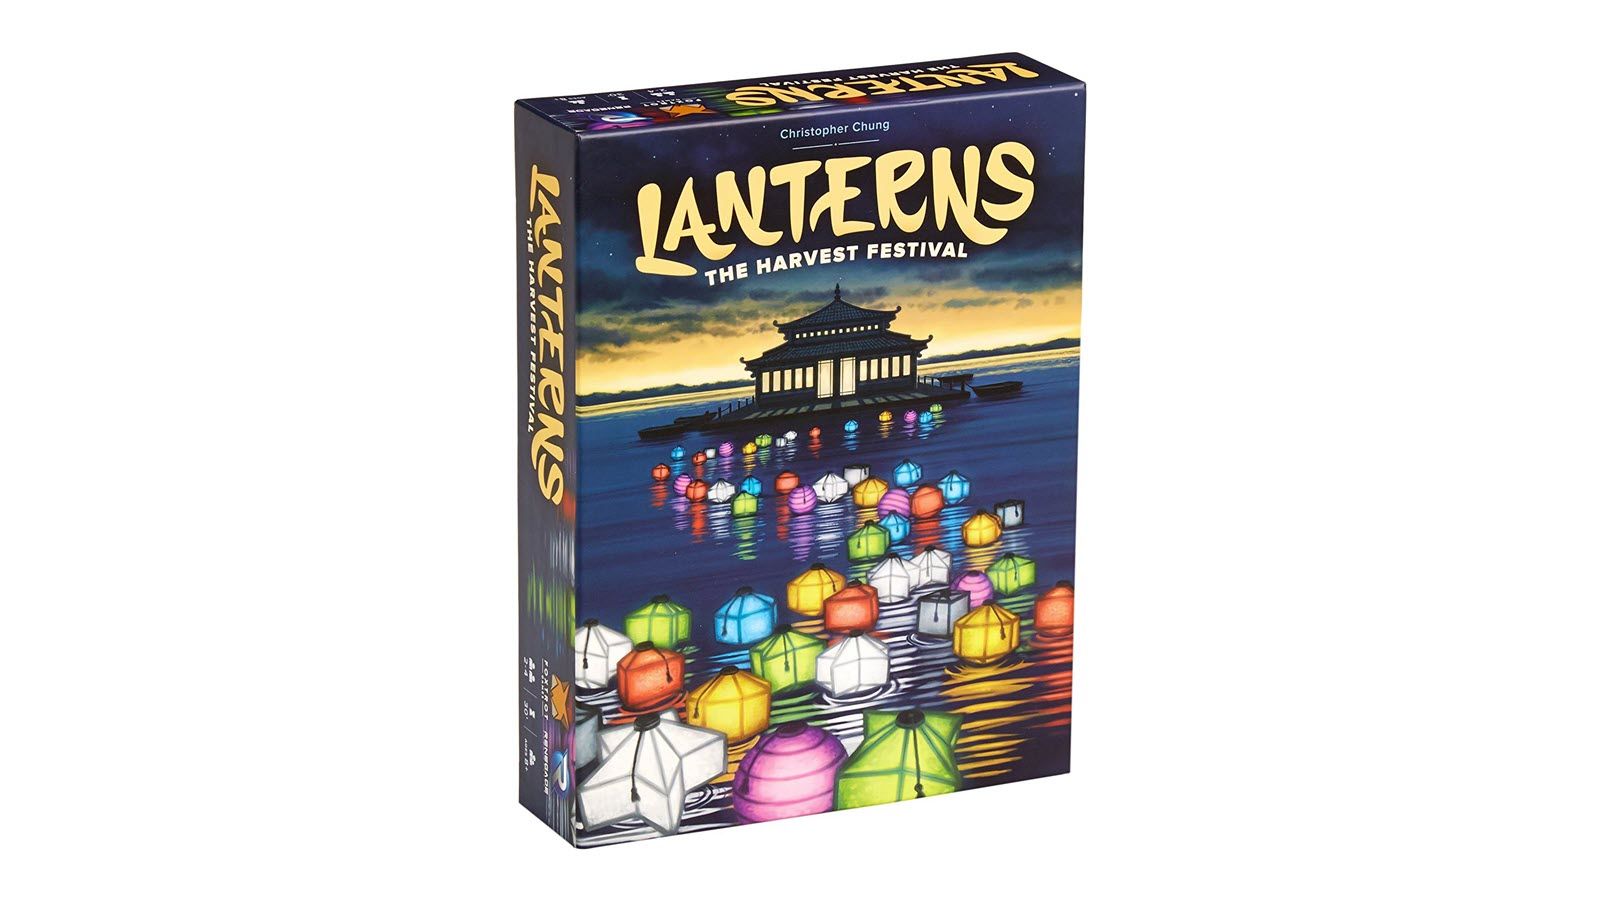 The Lanterns game box featuring colored lanterns floating in a line on a lake.